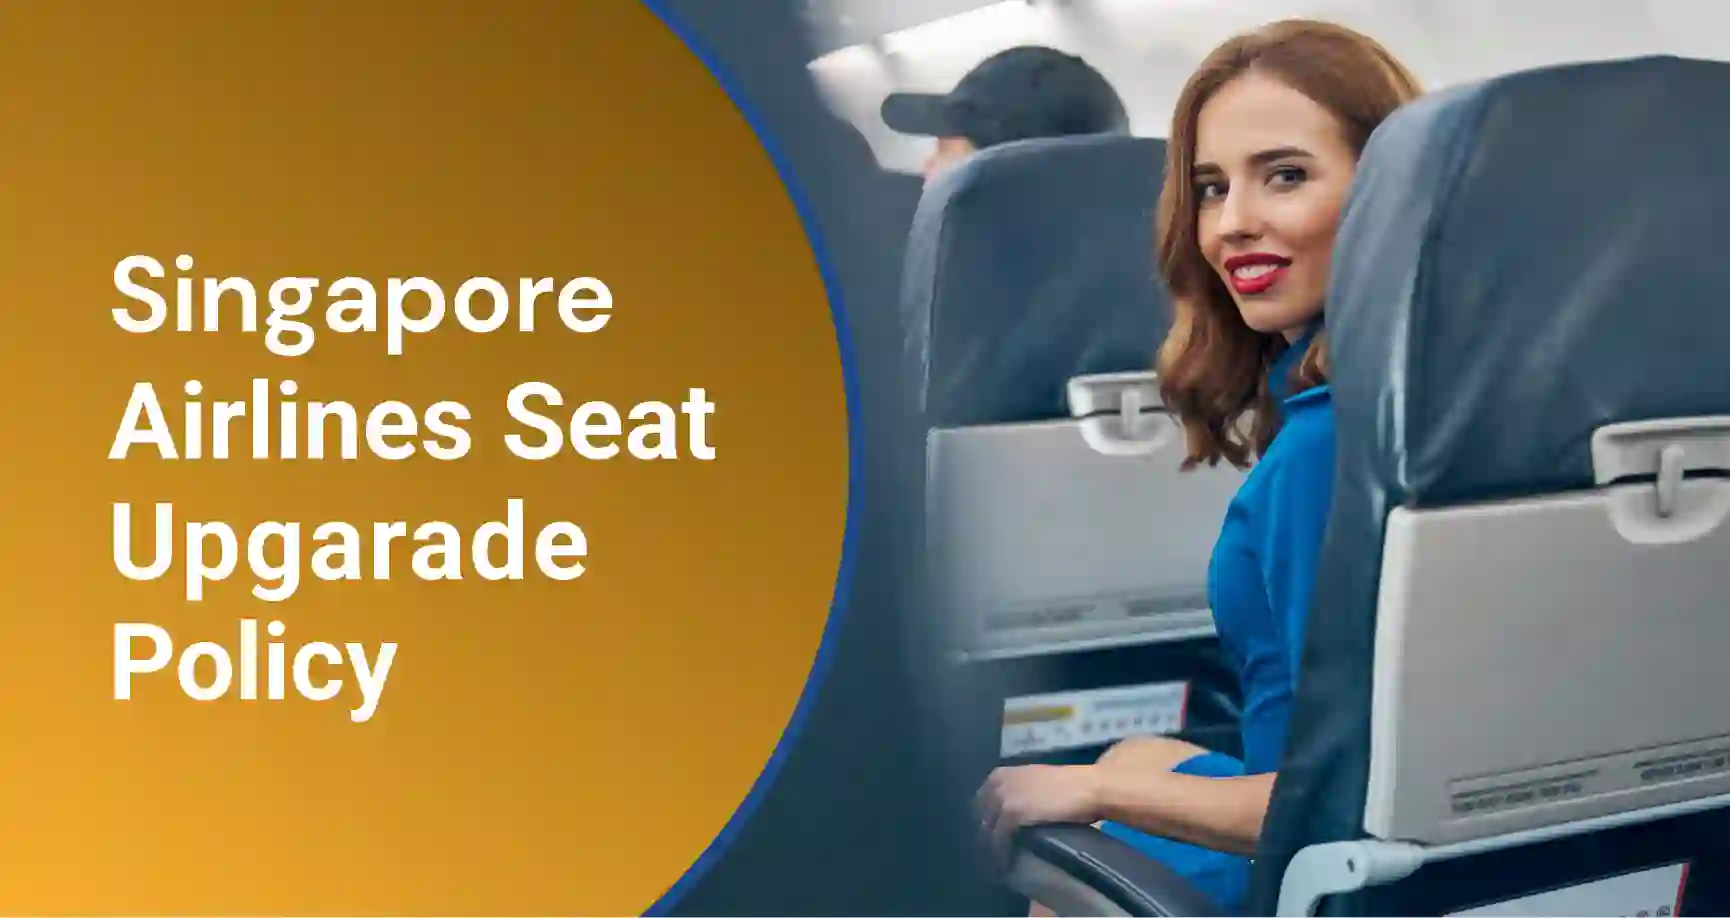 Singapore Airlines Seat Upgrade Policy